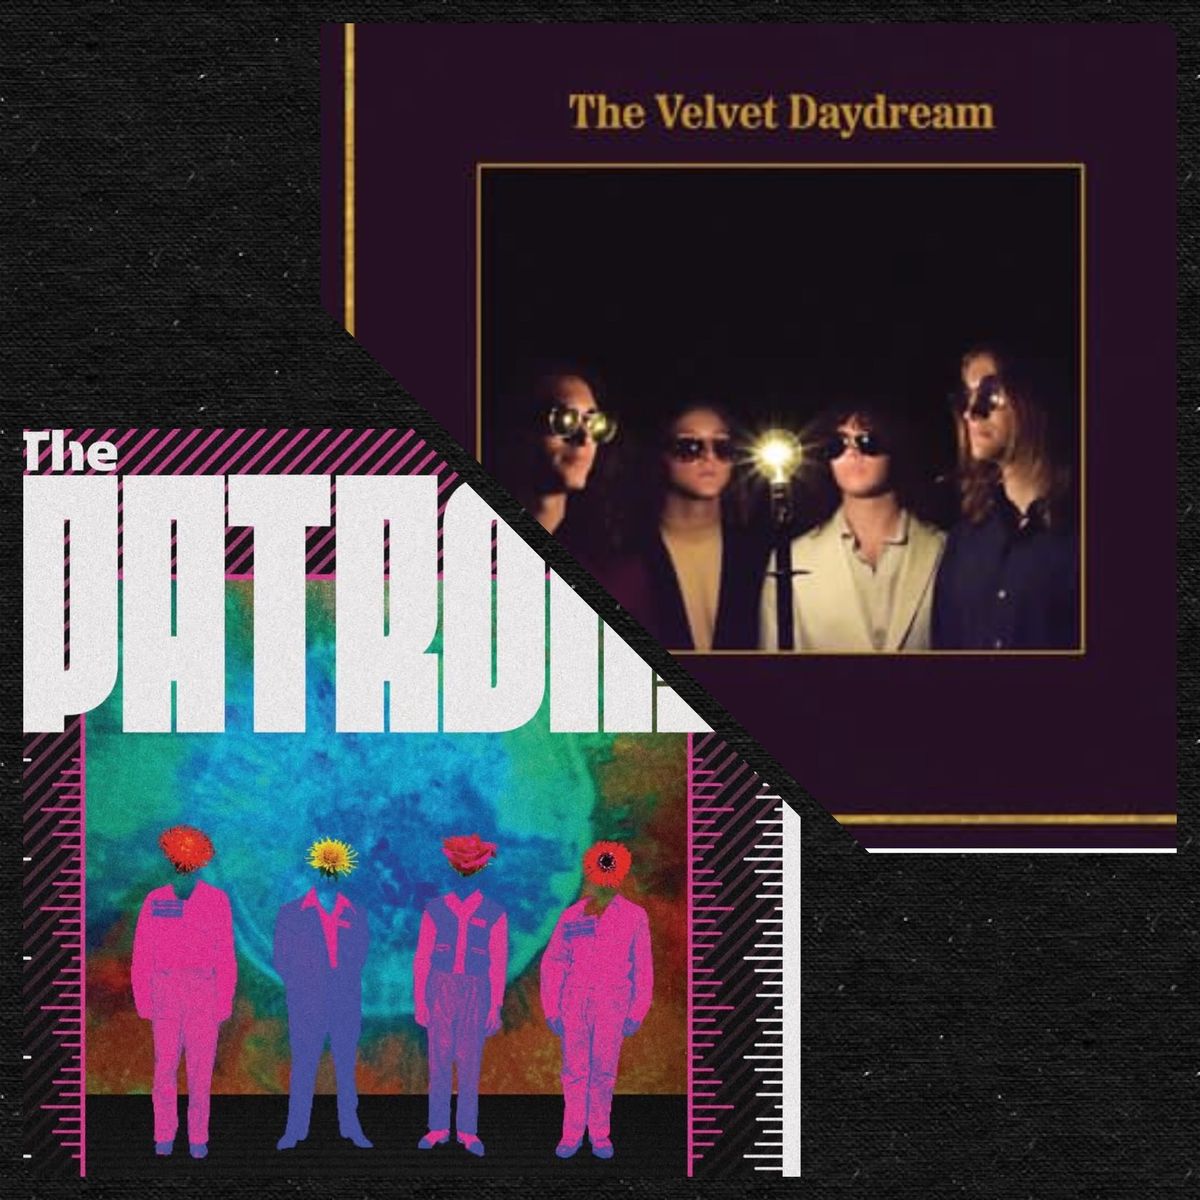 \ud83c\udfb6\ud83c\udfb8\ud83c\udf89\ud83c\udf08\ud83d\ude29\ud83d\ude4f\ud83d\udda4Sunday June 2 The Velvet Daydream w\/The Patrons